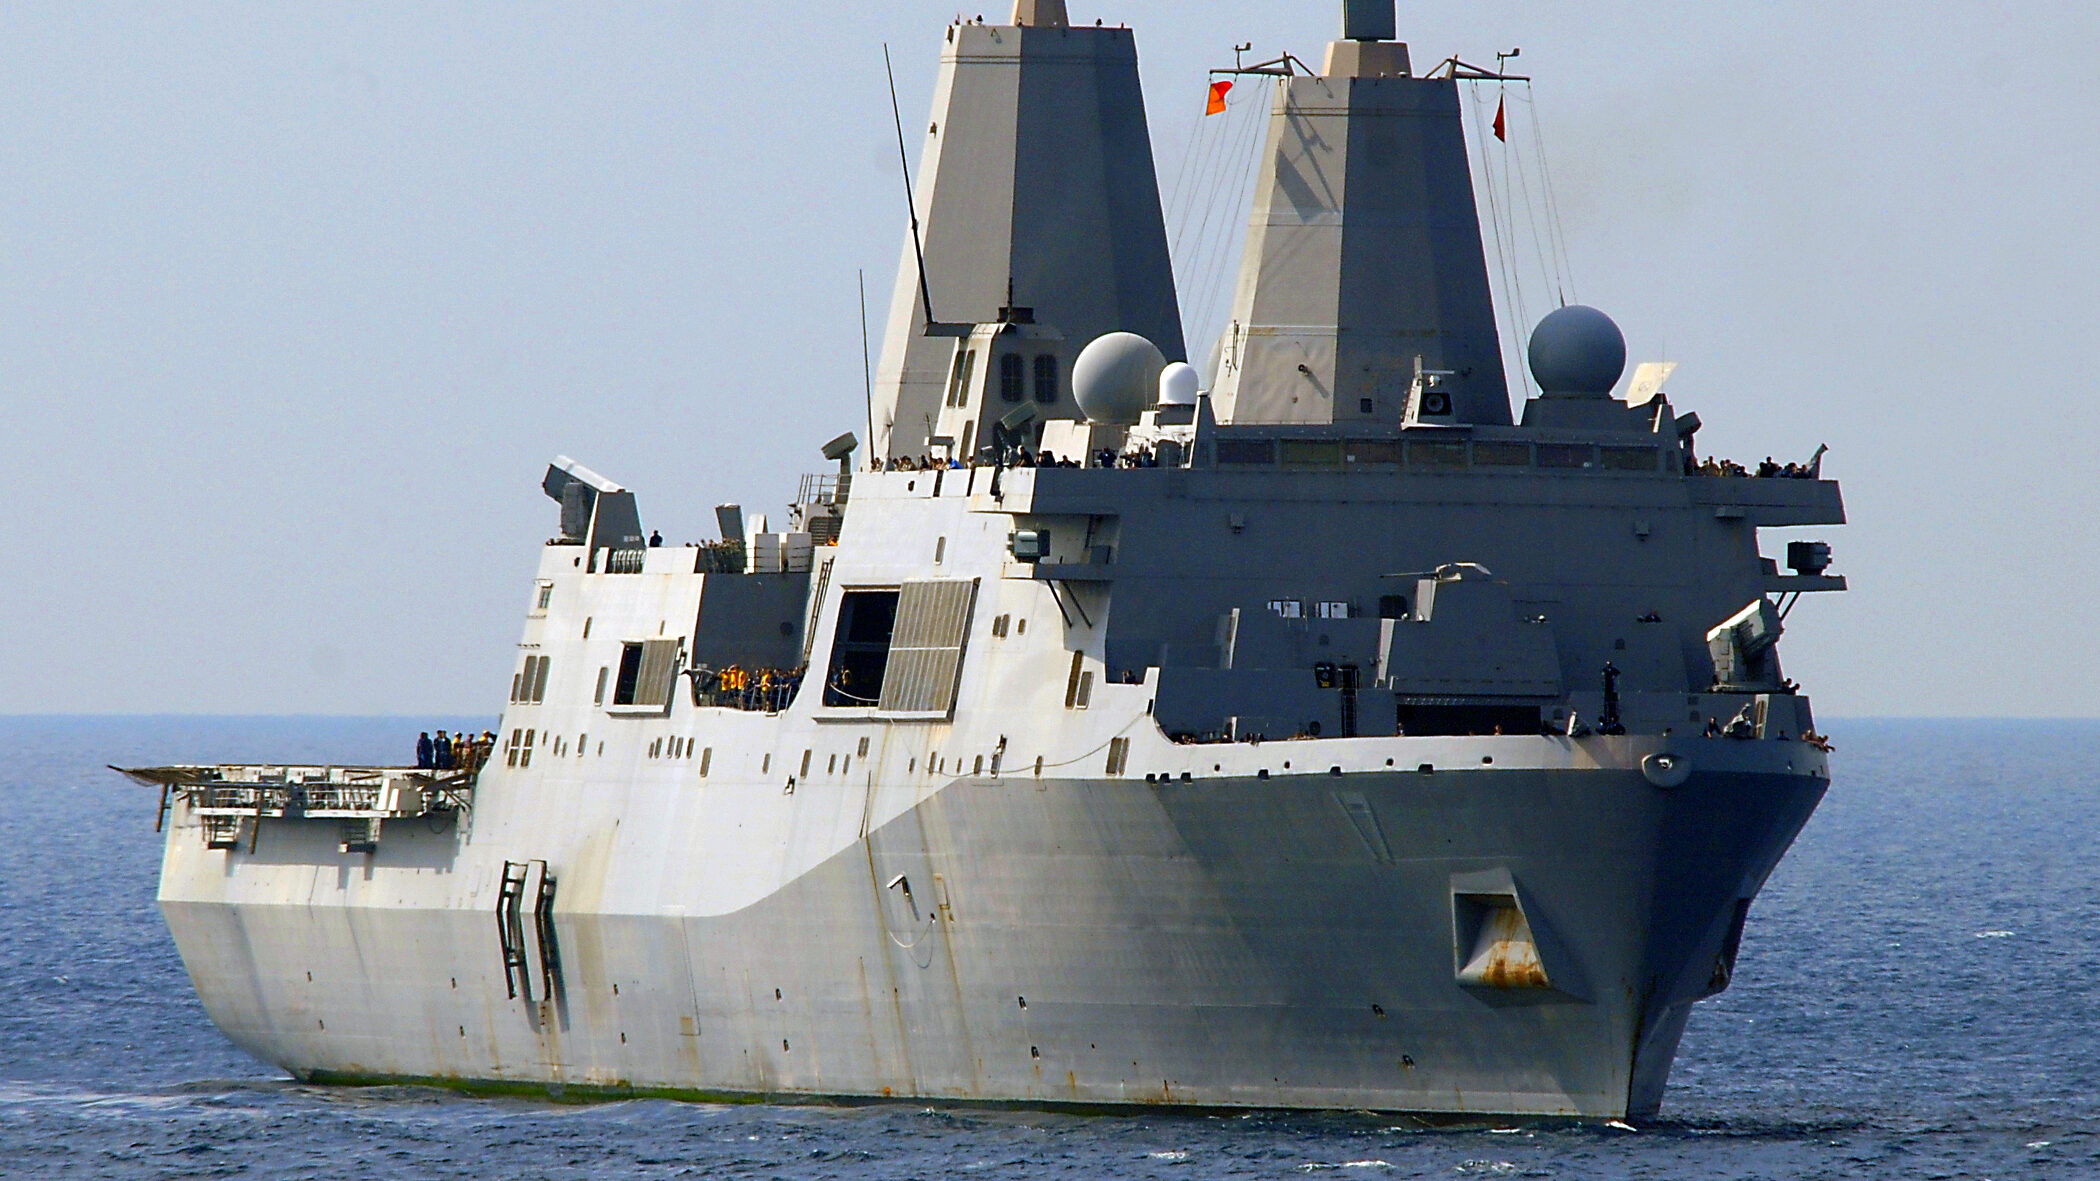 House moves to fund Marines’ amphib following heated budget cycle